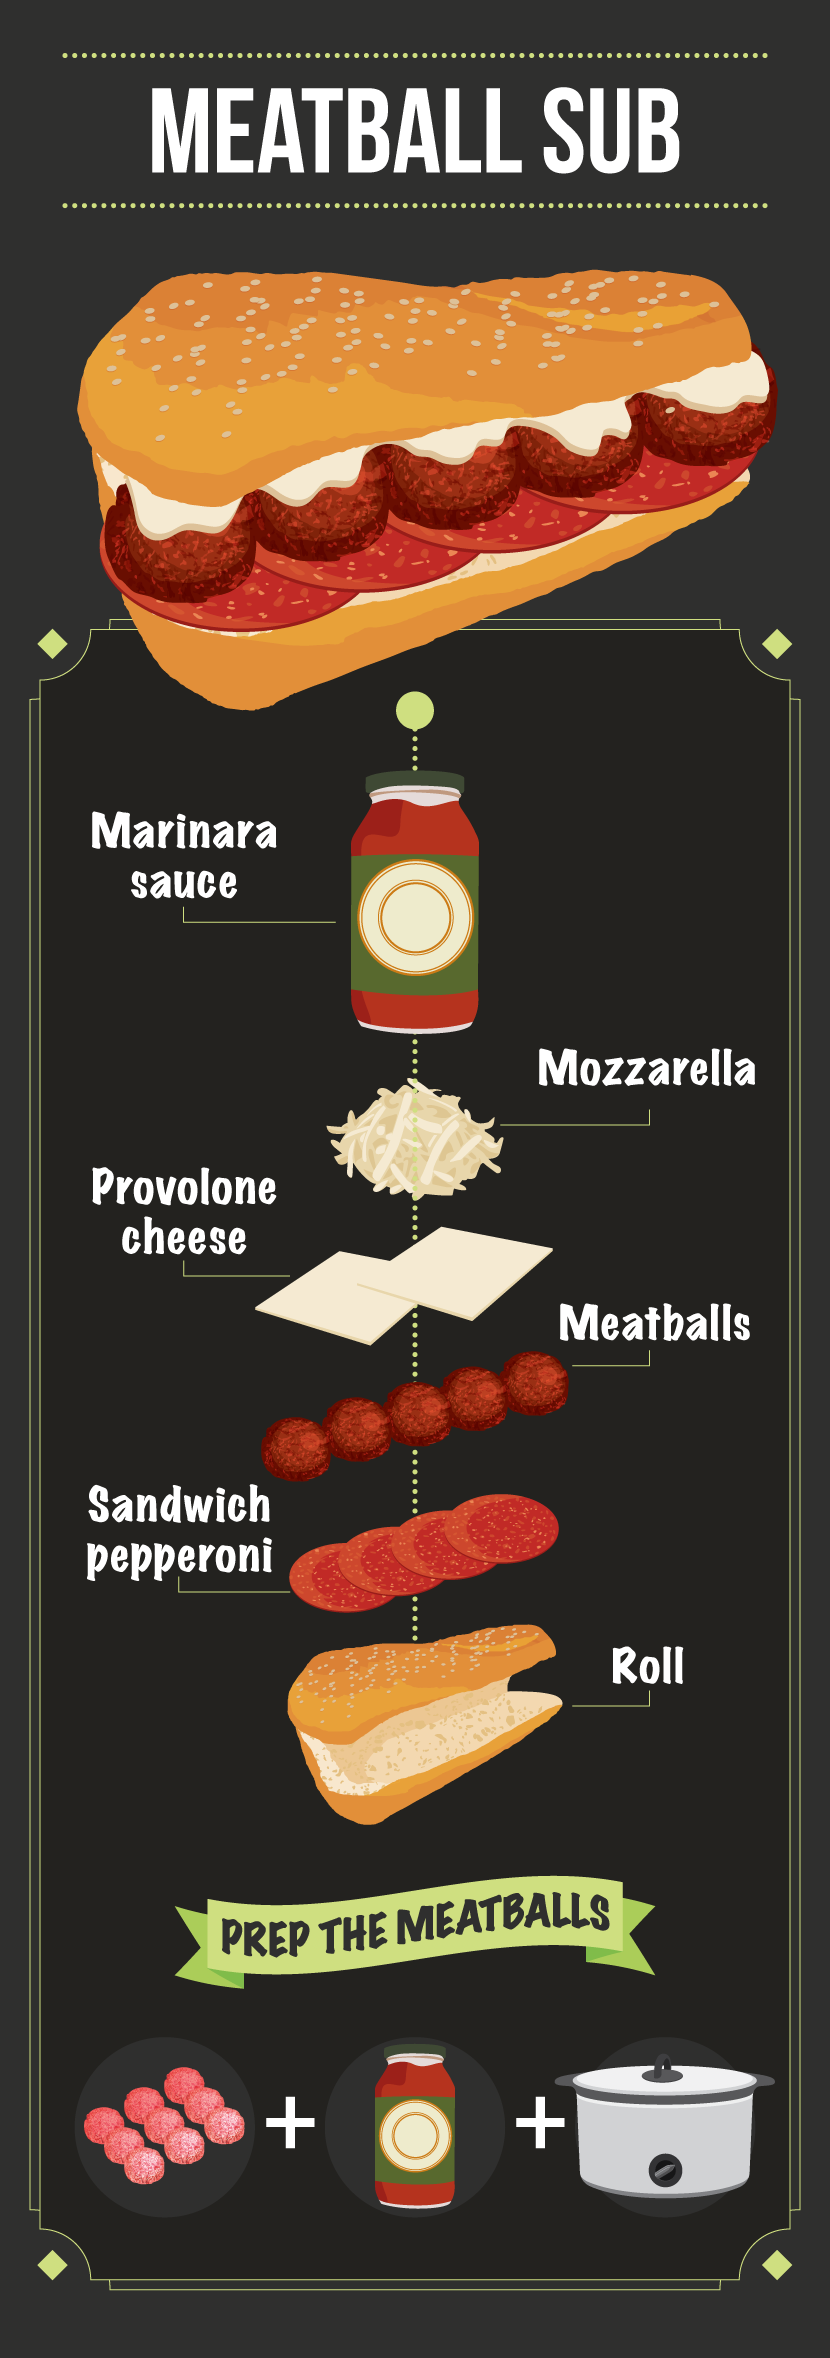 Meatball Sub - How to Make the Perfect Sub